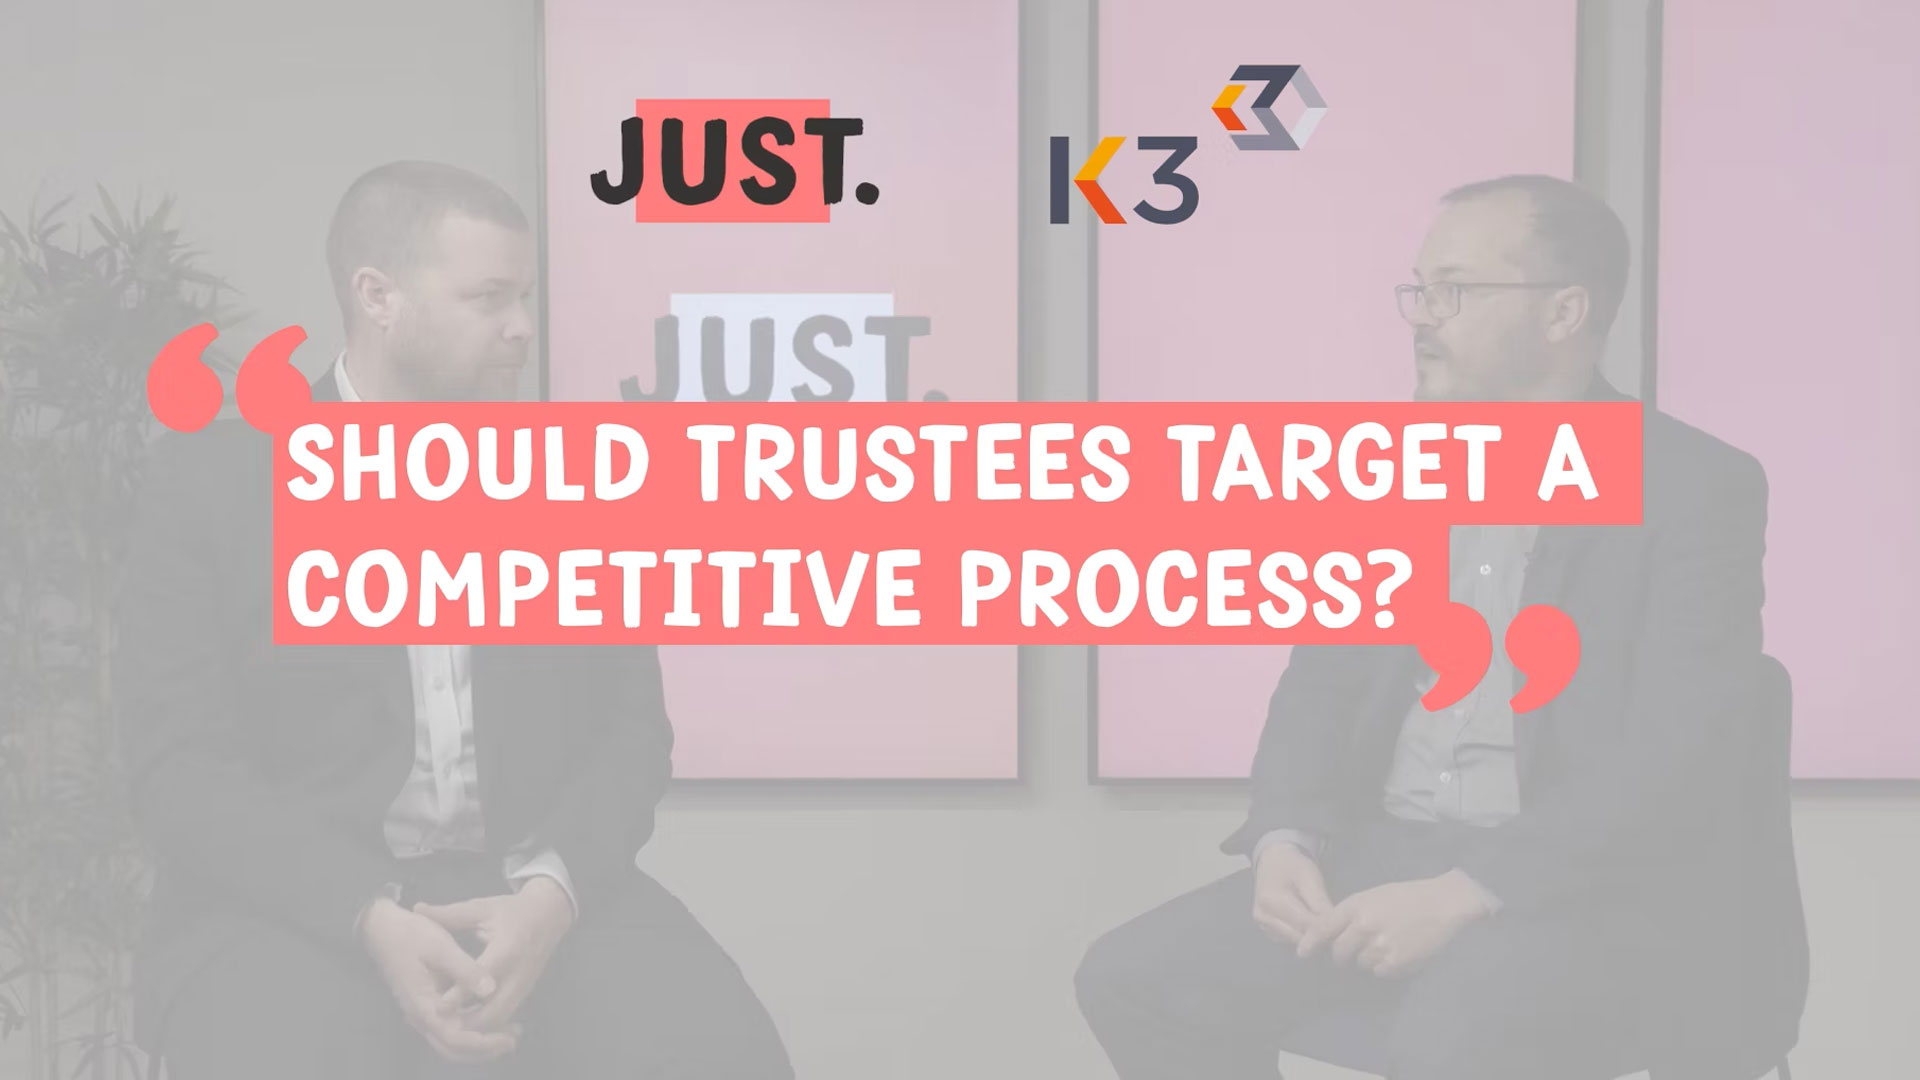 Should trustees target a competitive process?